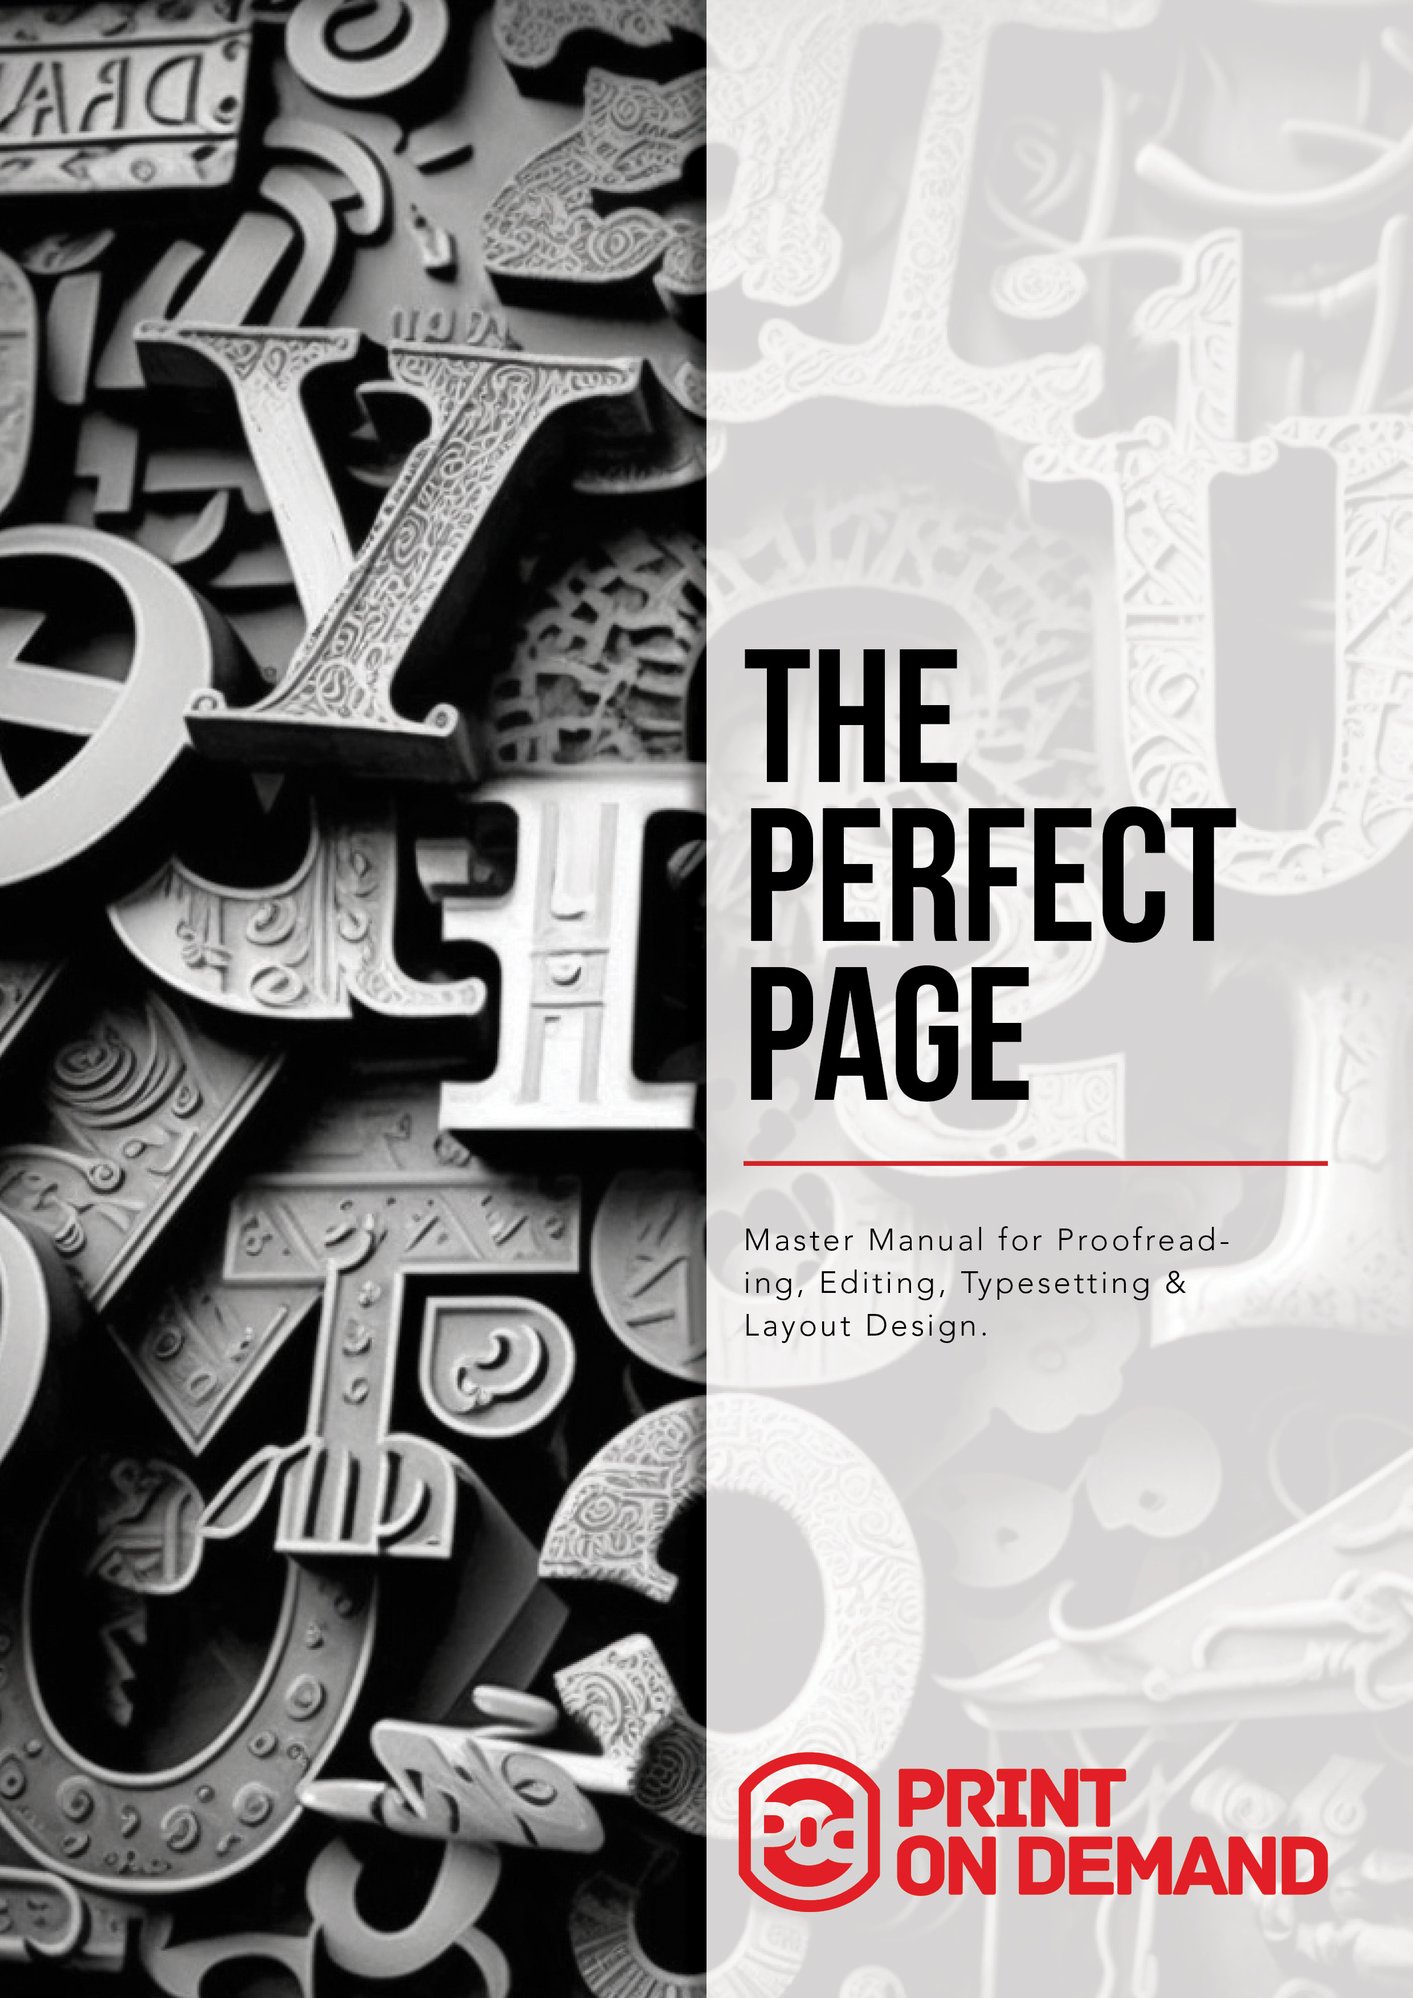 The_Perfect_Page_-_Master_Manual_for_Proofreading,_Editing,_Typesetting,_and_Layout_Design_V1